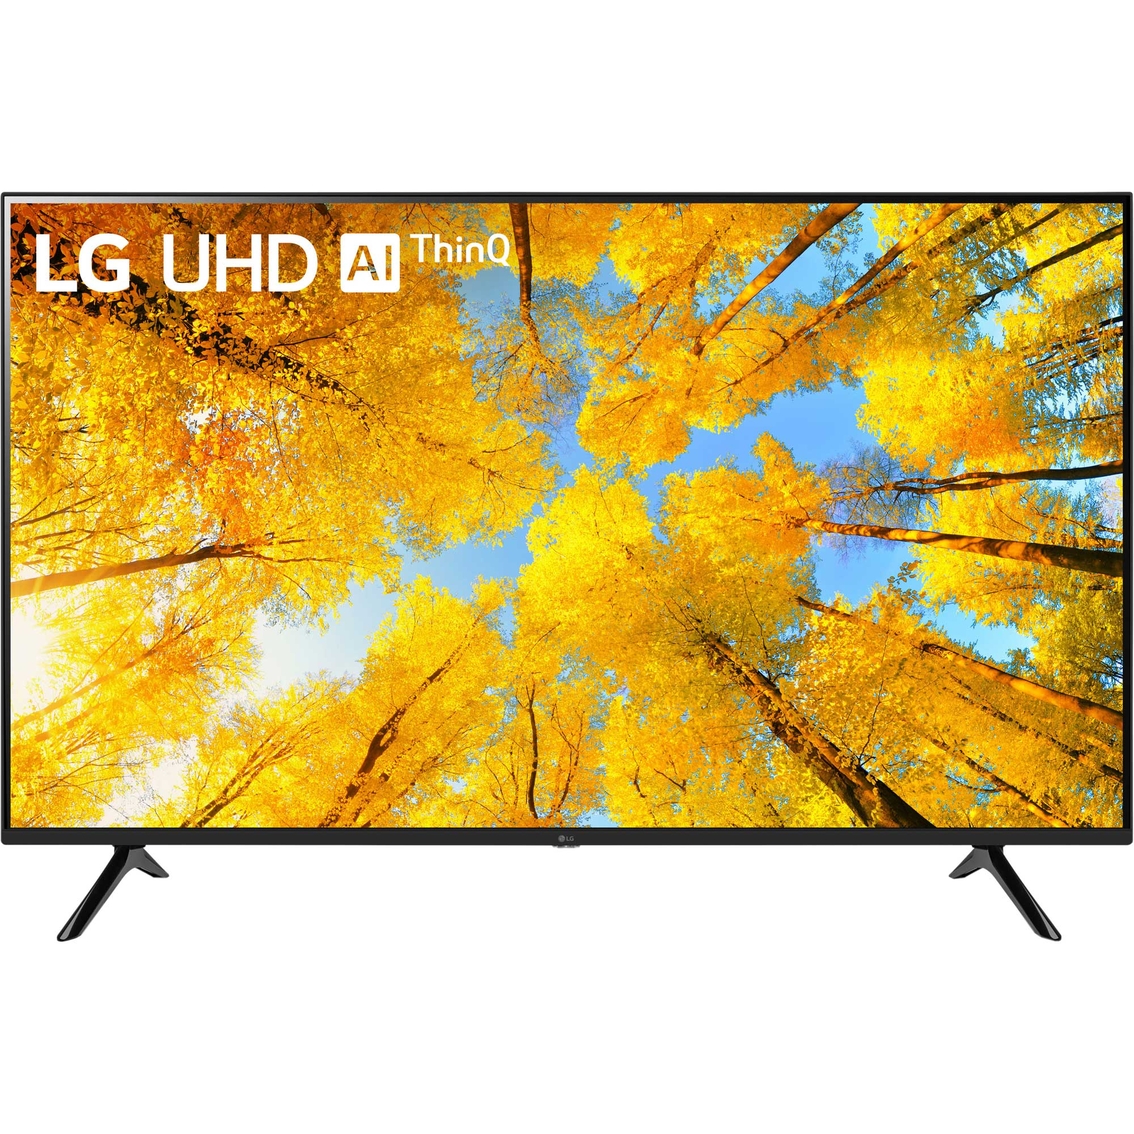 LG 55 in. 4K HDR Smart TV with AI ThinQ 55UQ7570PUJ - Image 1 of 9